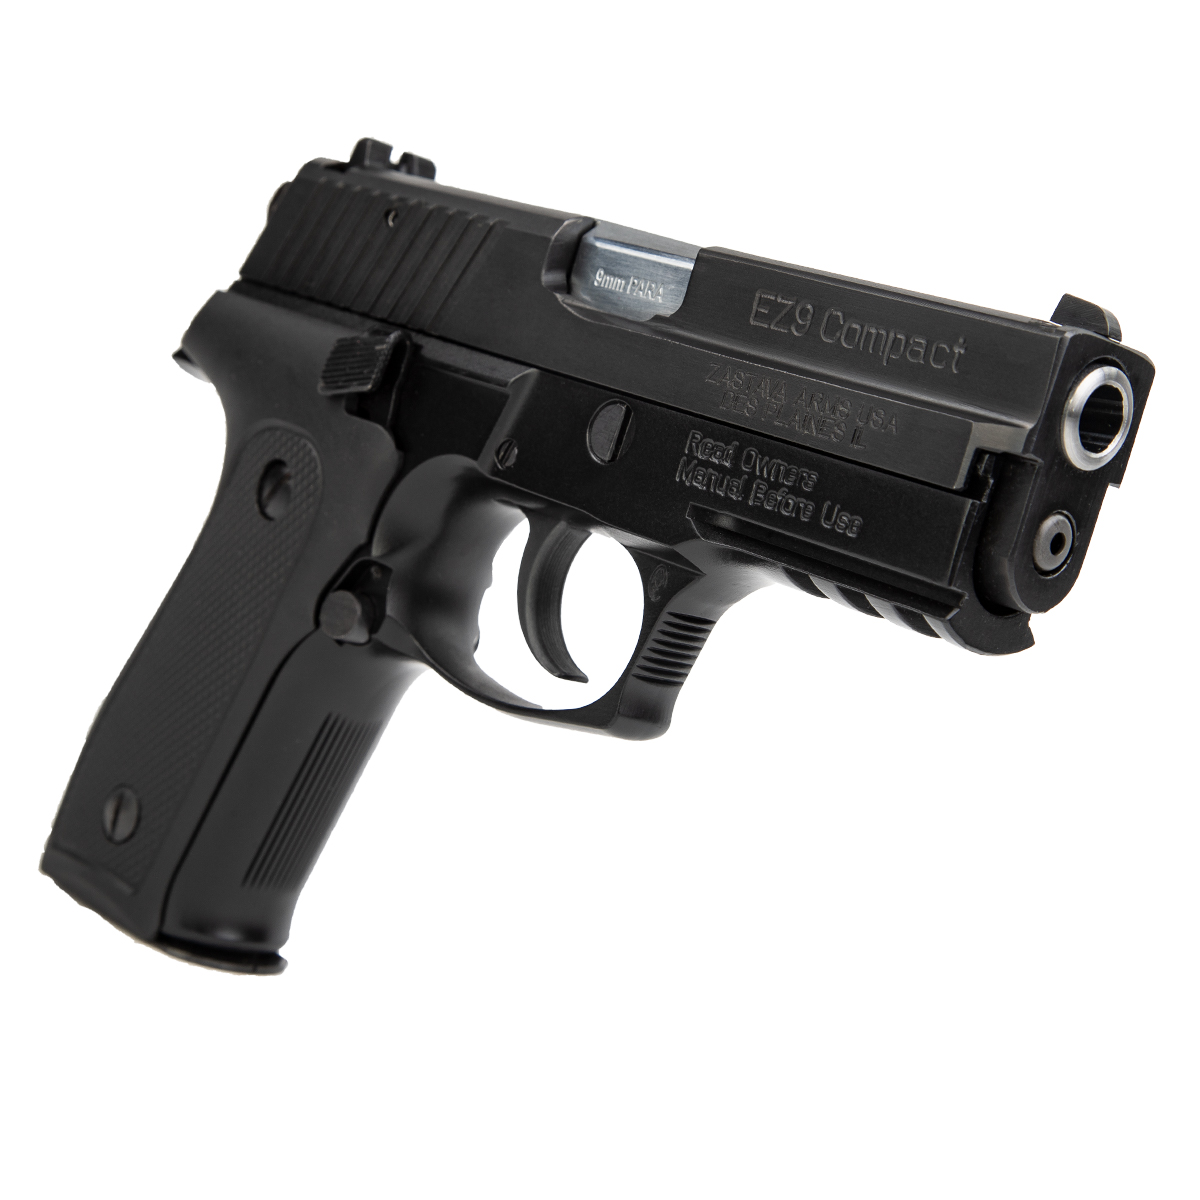 ez9 pistol compact right angled